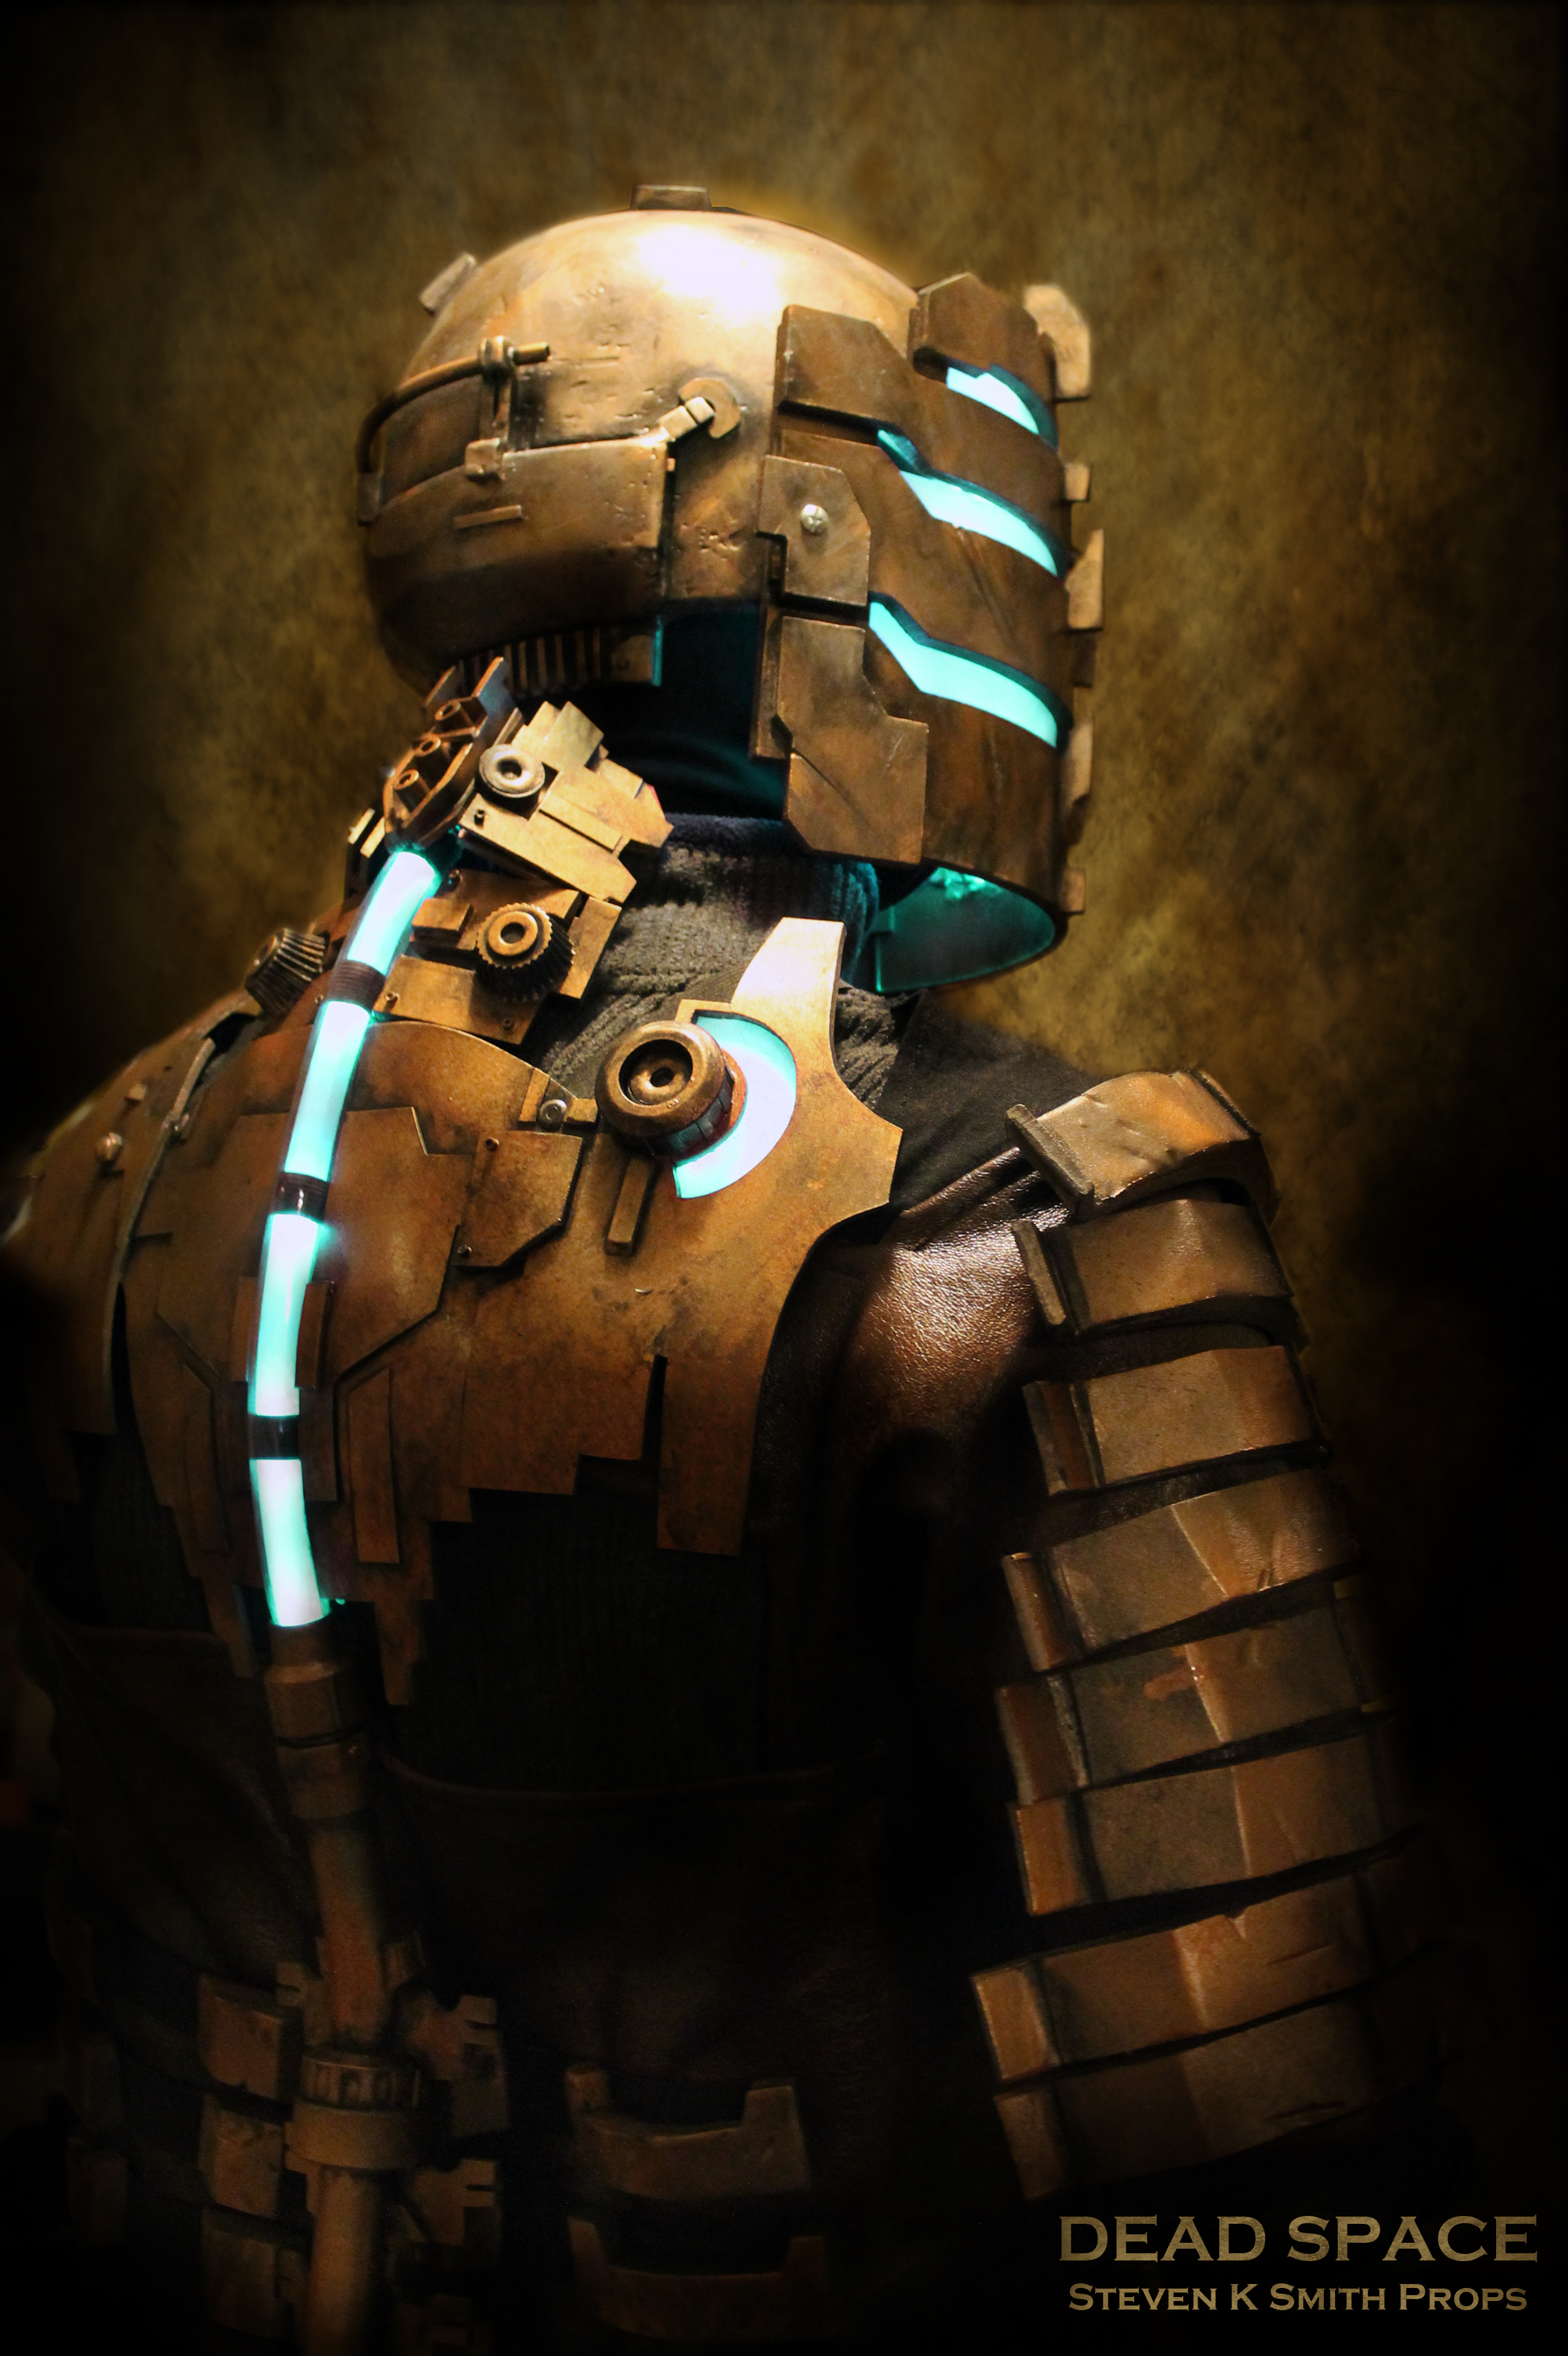 DEAD SPACE - Isaac Clarke Level 3 Suit Complete Cosplay Build